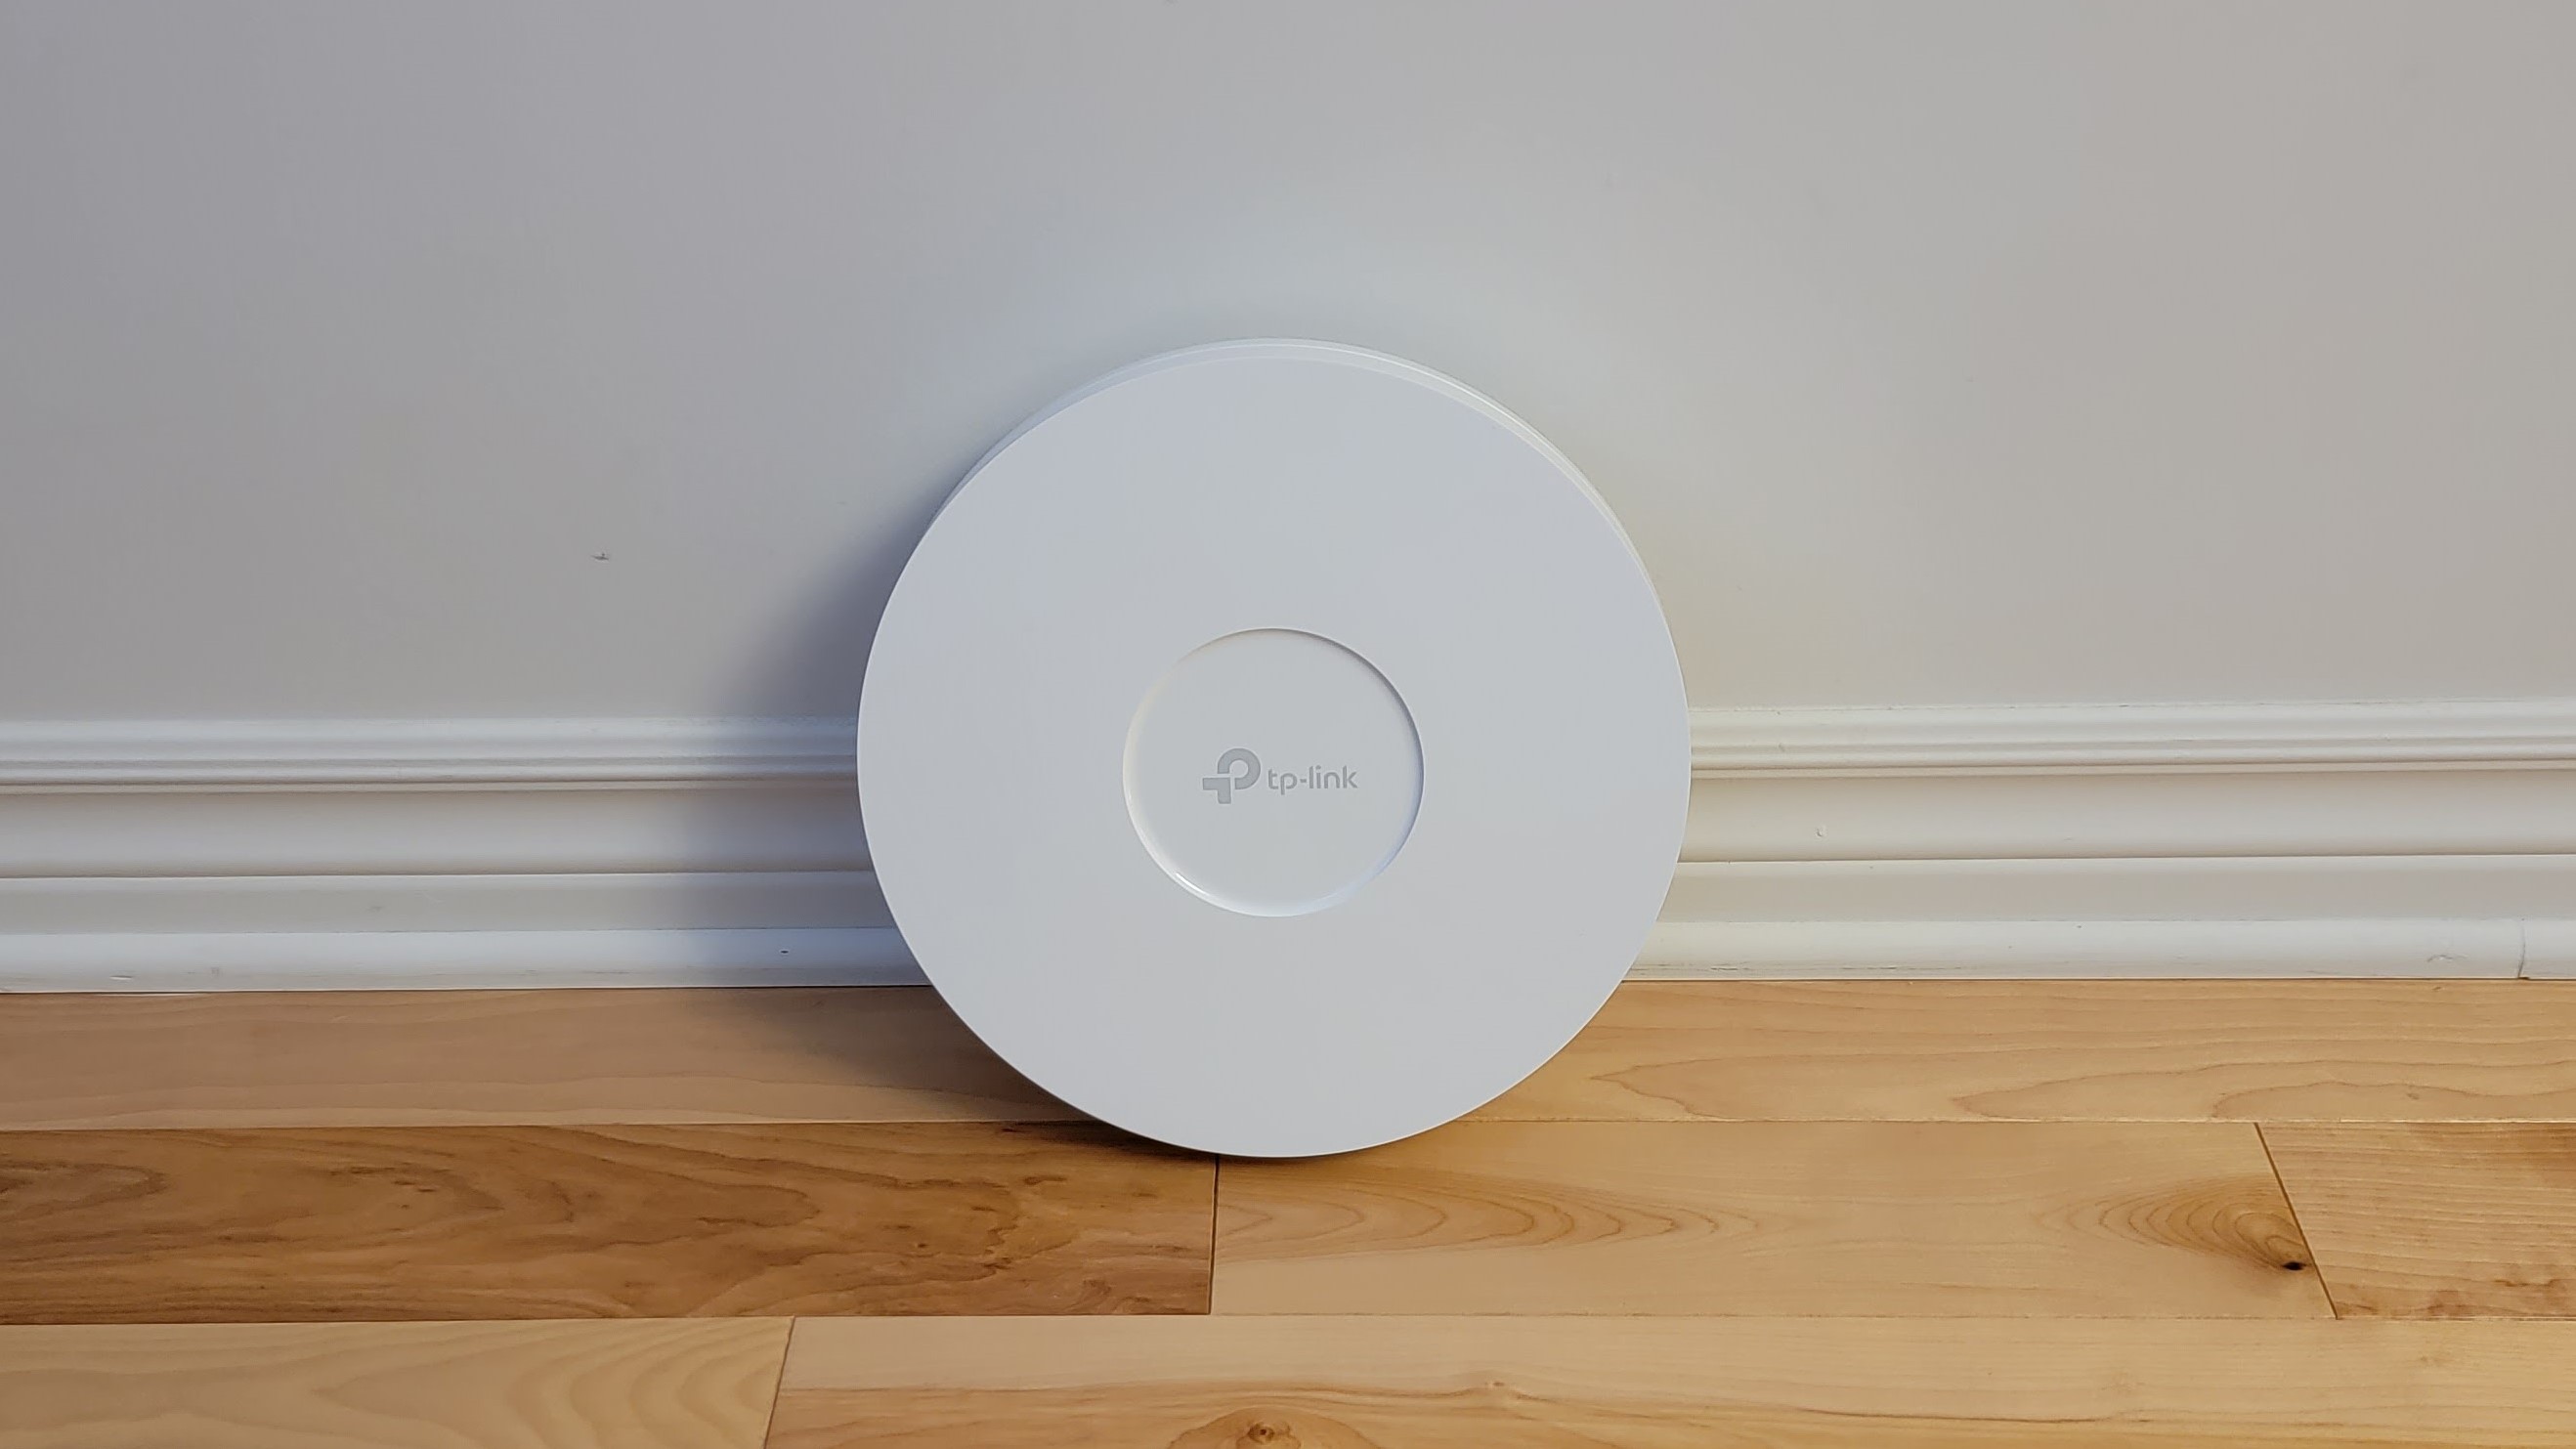 TP-Link EAP660HD Wi-Fi 6 access point review